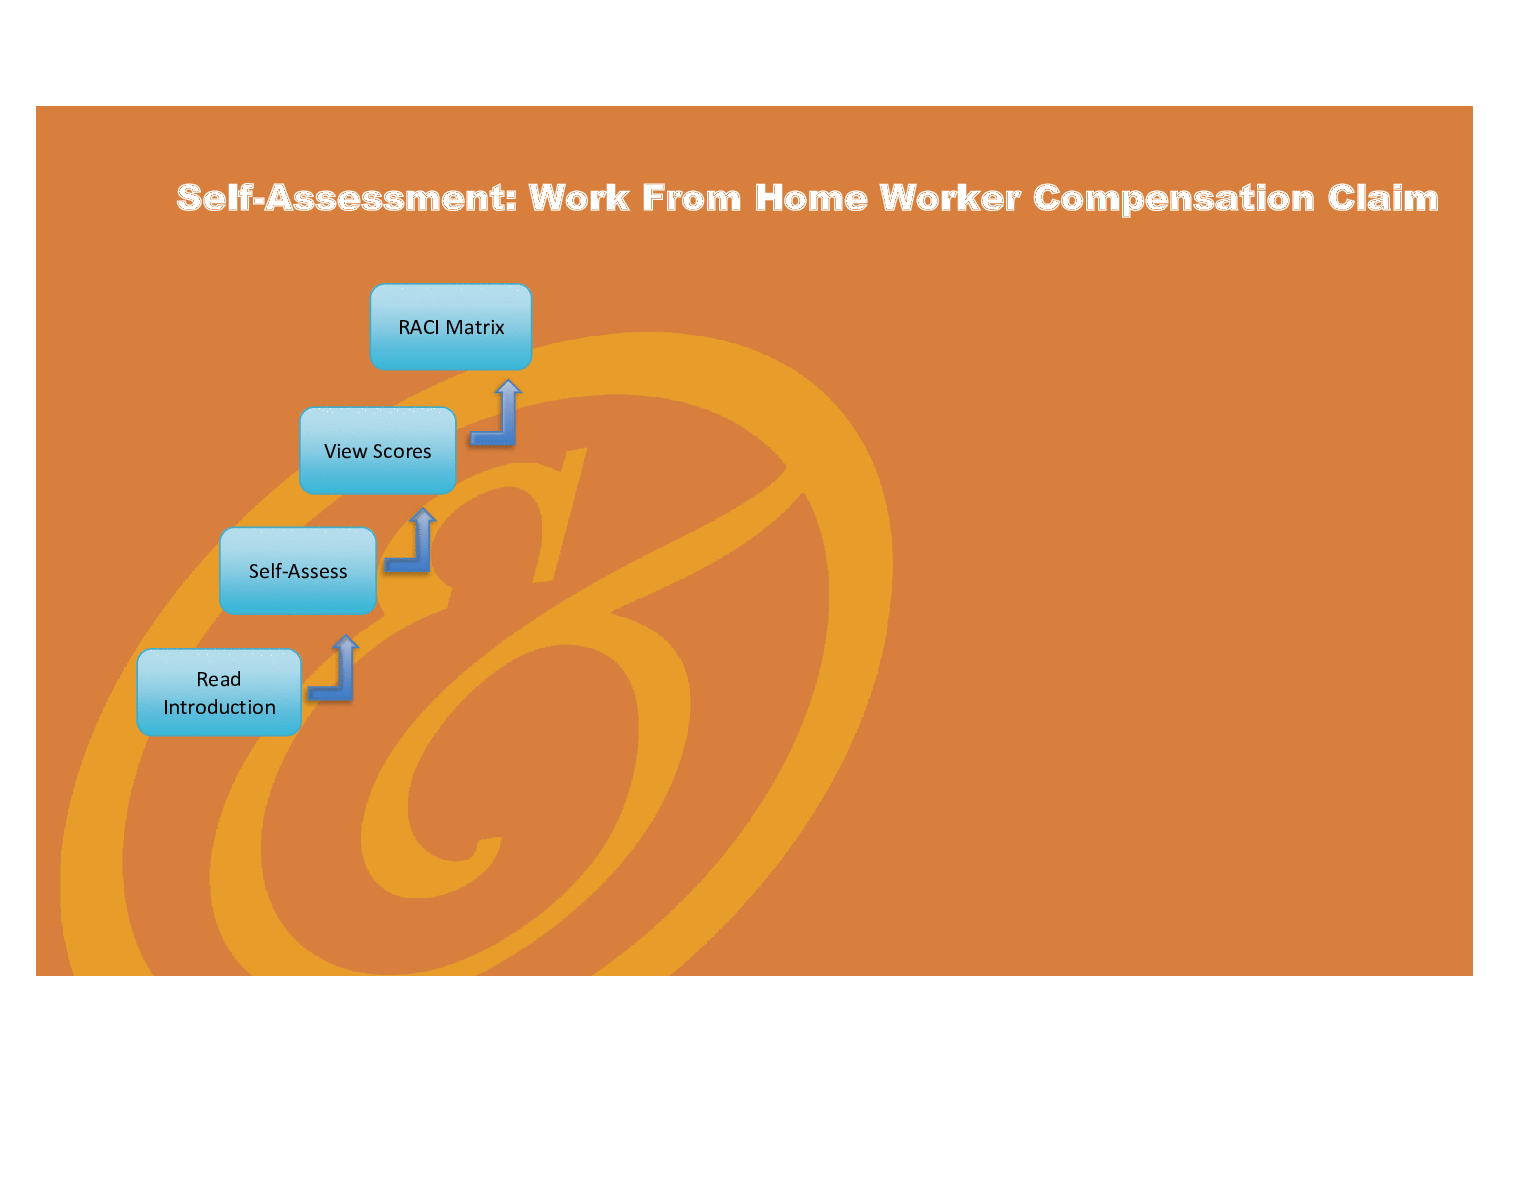 Work from Home Worker Compensation Claim - Implementation Toolkit